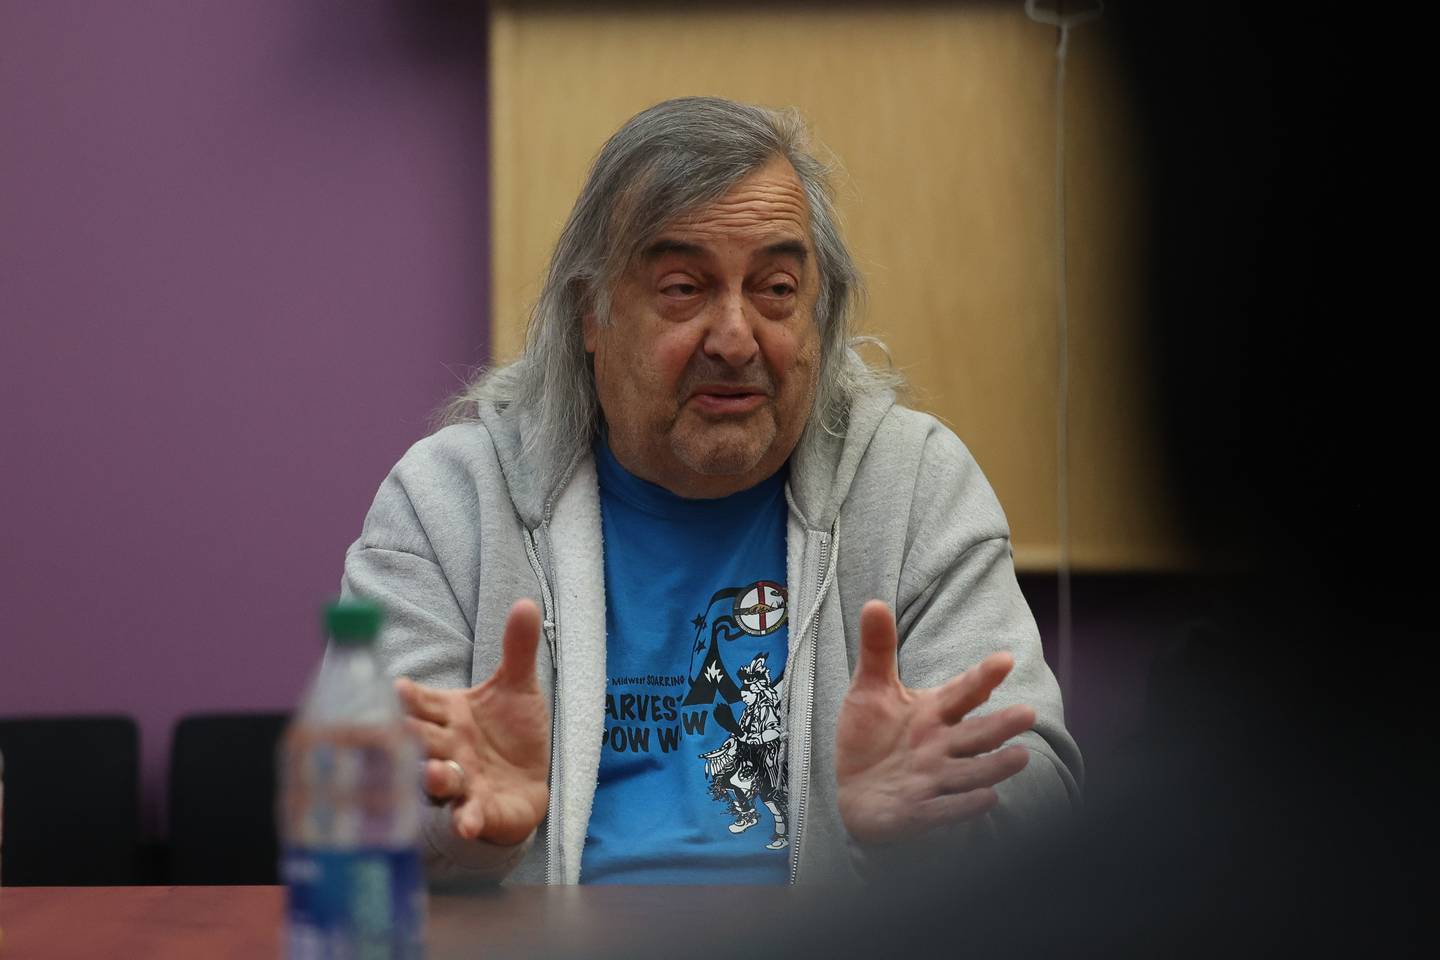 Joseph “Standing Bear” Schranz, from the Ojibwa tribe at White Earth reservation in Minnesota, talks to Joliet Junior College students and staff at a round table discussion on the destructive and dehumanization of Native American culture and their people on Thursday, Nov. 9, 2023 in Joliet.